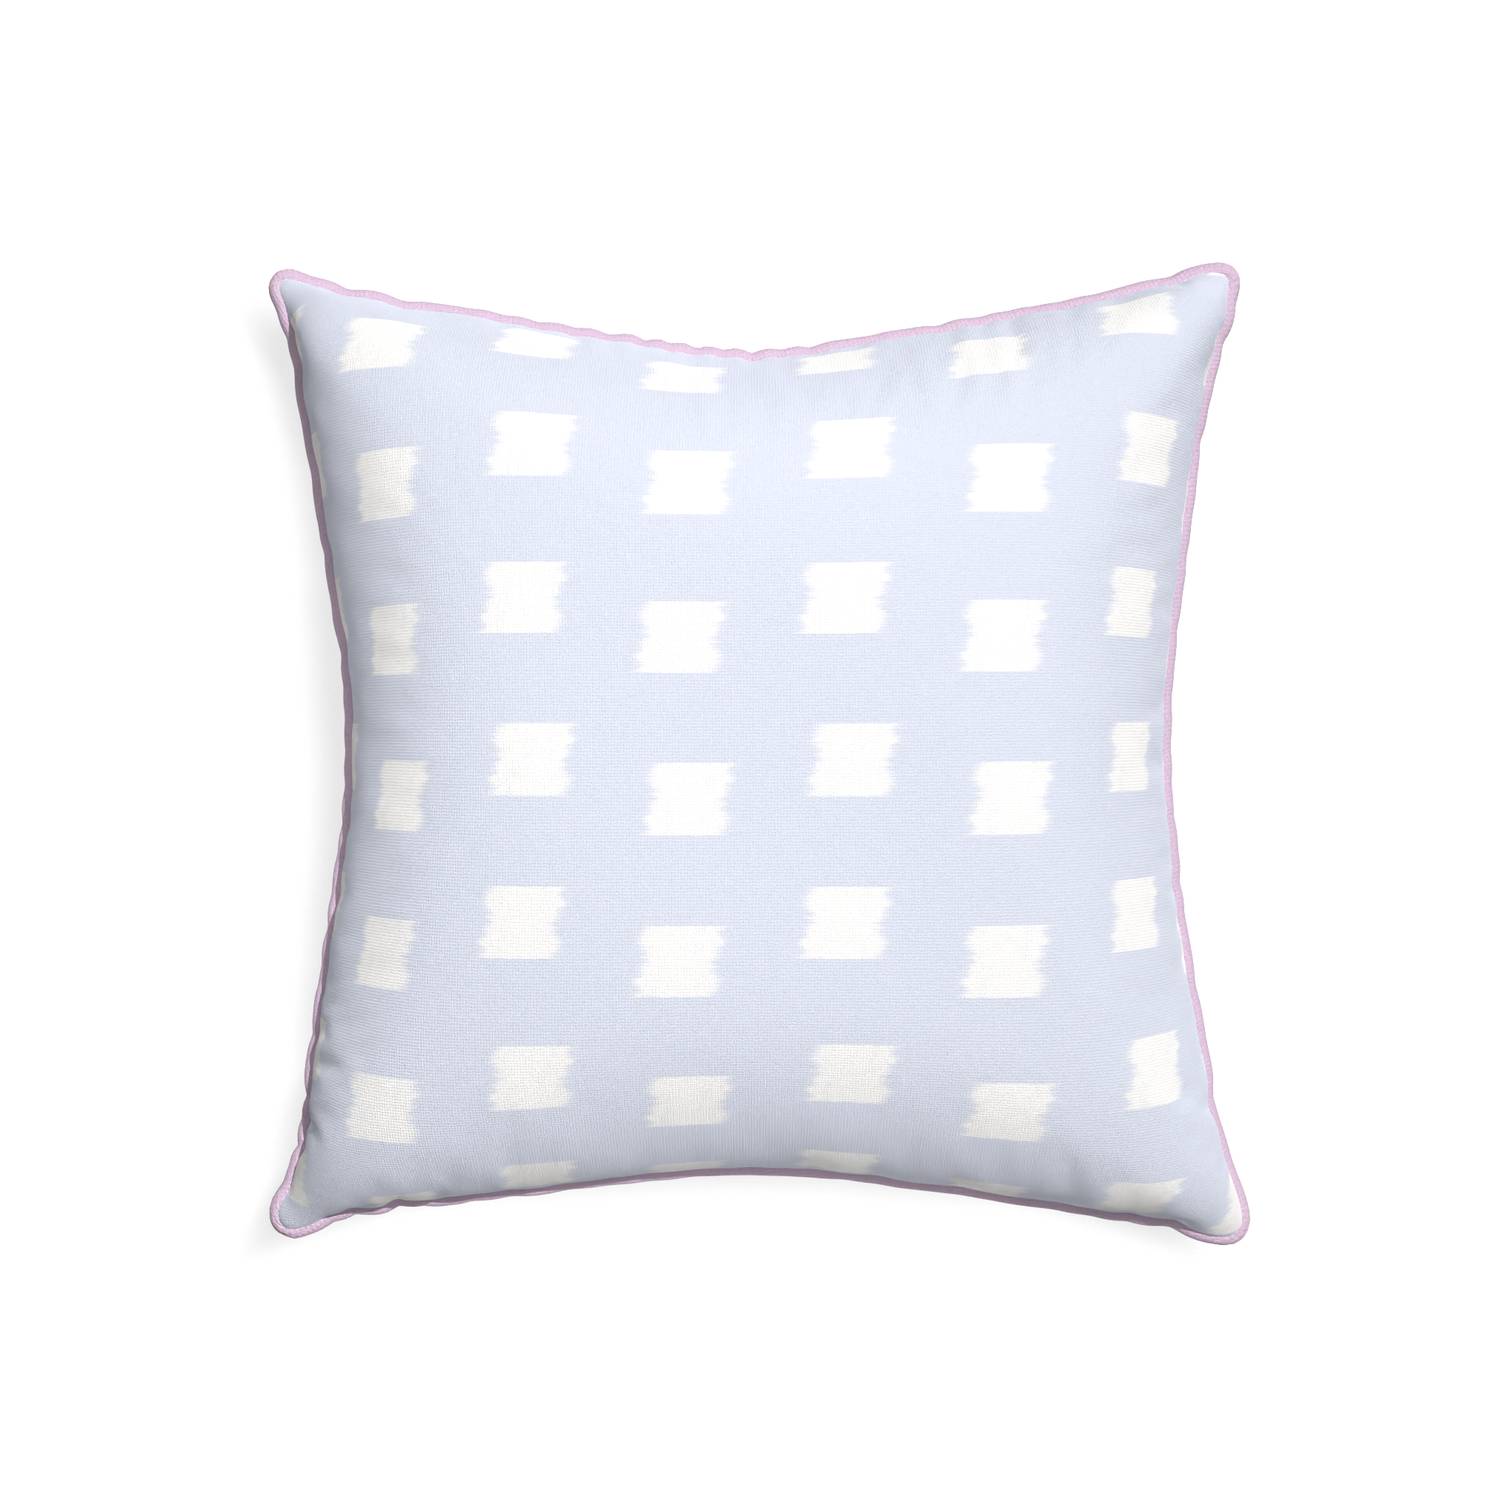 22-square denton custom sky blue patternpillow with l piping on white background